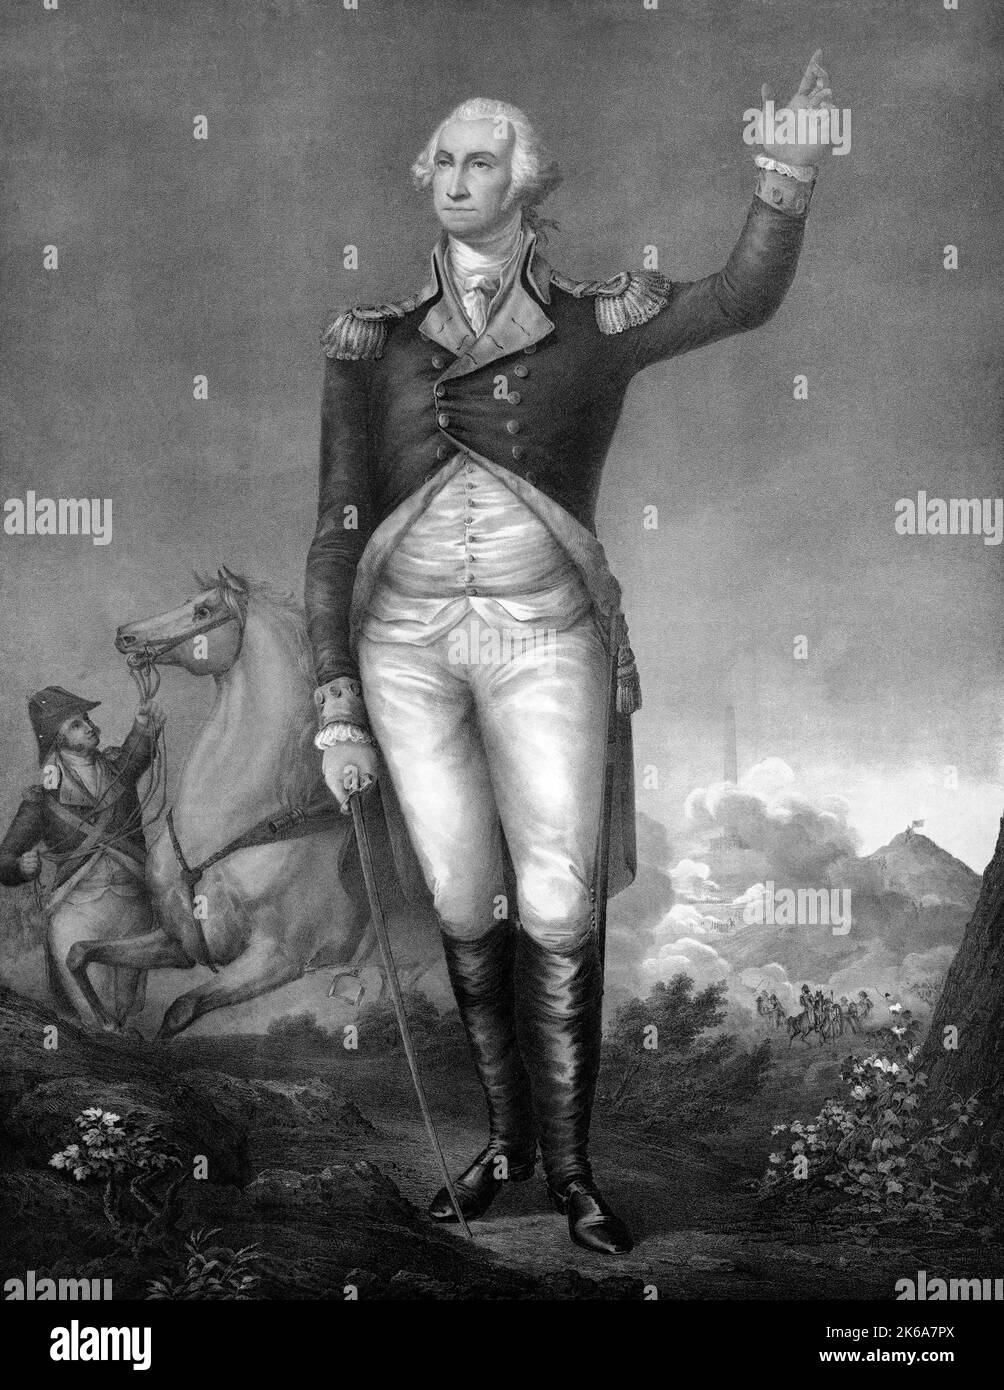 Lithograph of George Washington in uniform during the American Revolutionary War. Stock Photo